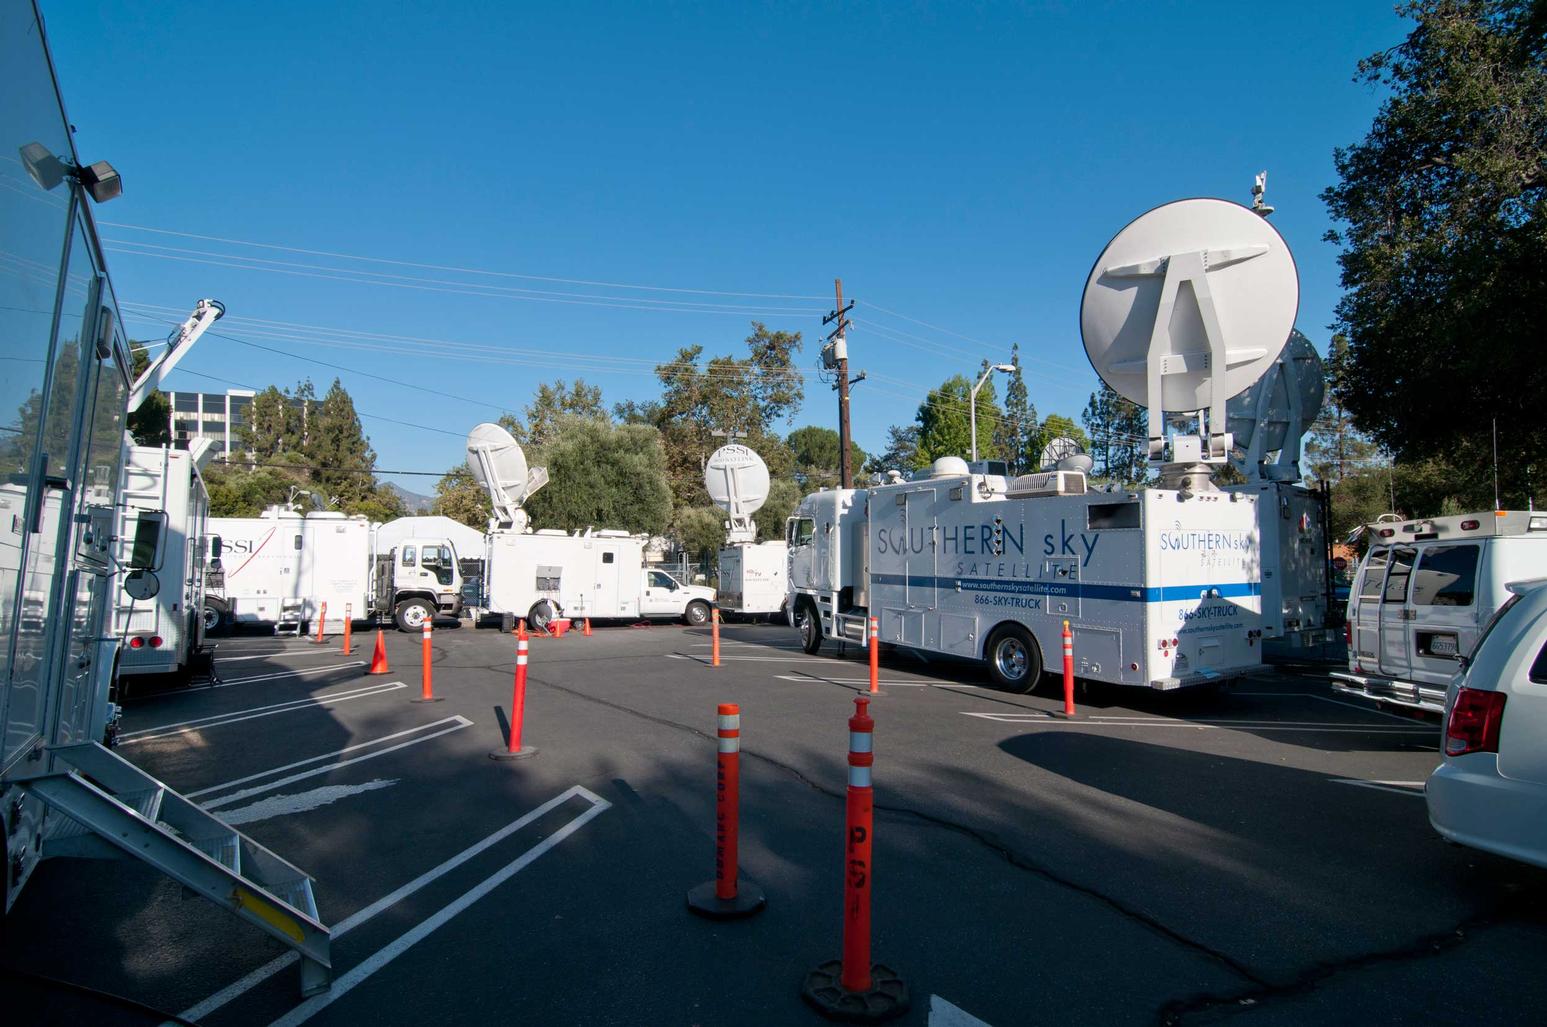 Satellite news trucks crowd the parking lots at NASA's Jet Propulsion Laboratory in Pasadena, Calif., on Aug. 5, 2012, in preparation for the Curiosity rover's landing on Mars.